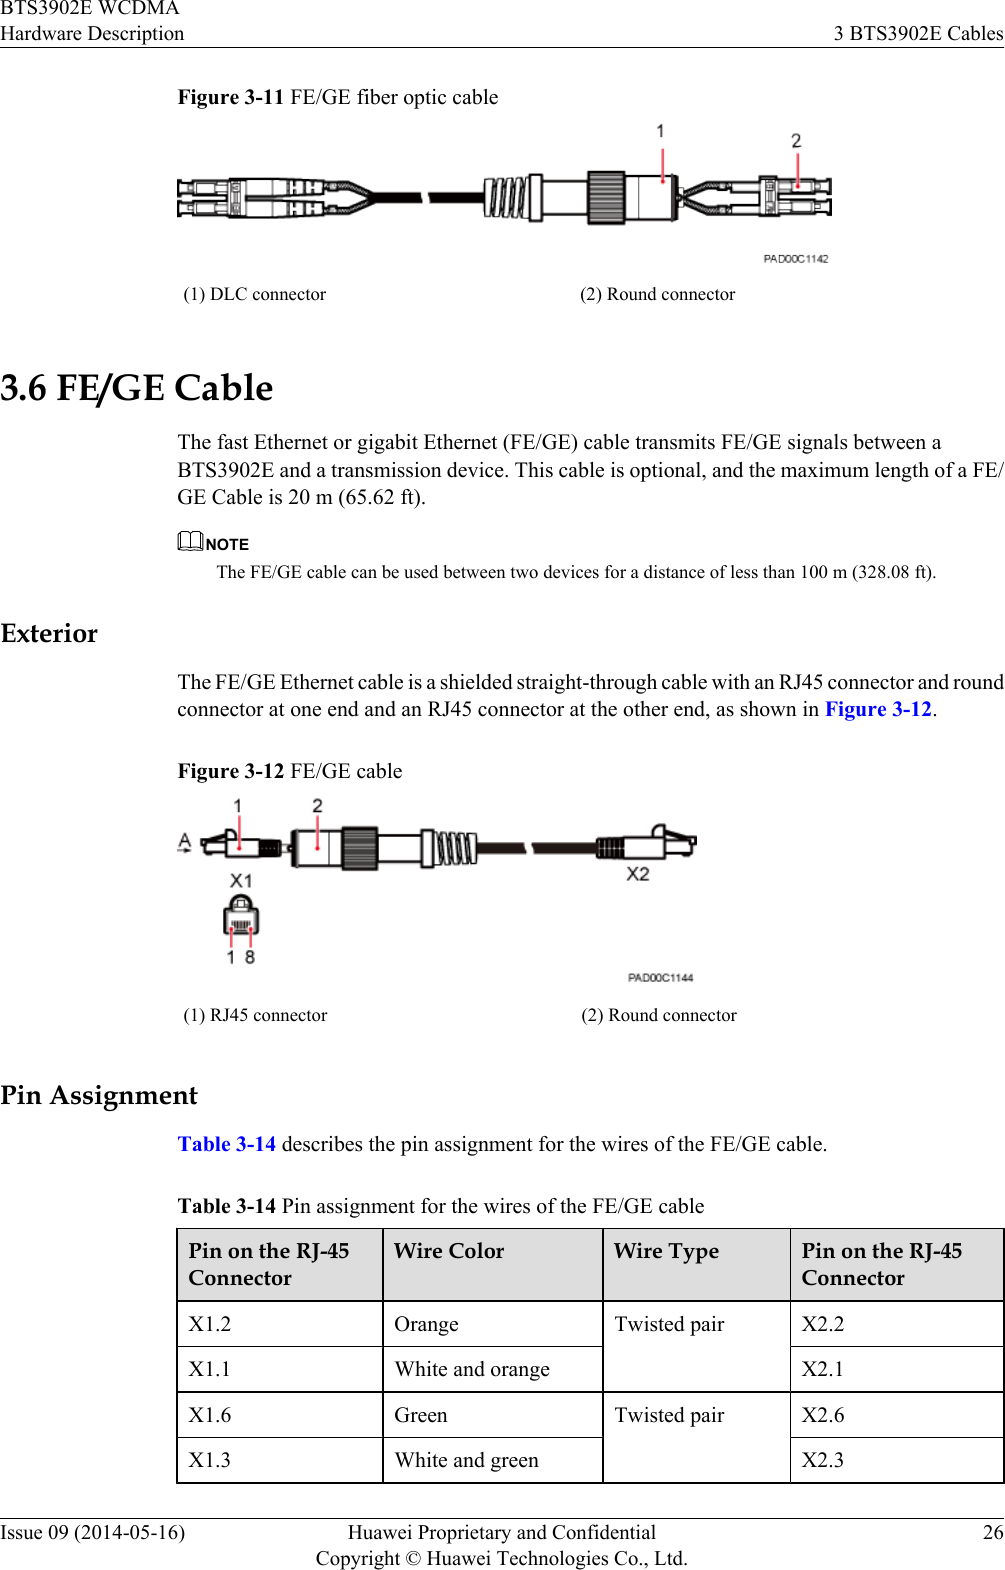 Figure 3-11 FE/GE fiber optic cable(1) DLC connector (2) Round connector3.6 FE/GE CableThe fast Ethernet or gigabit Ethernet (FE/GE) cable transmits FE/GE signals between aBTS3902E and a transmission device. This cable is optional, and the maximum length of a FE/GE Cable is 20 m (65.62 ft).NOTEThe FE/GE cable can be used between two devices for a distance of less than 100 m (328.08 ft).ExteriorThe FE/GE Ethernet cable is a shielded straight-through cable with an RJ45 connector and roundconnector at one end and an RJ45 connector at the other end, as shown in Figure 3-12.Figure 3-12 FE/GE cable(1) RJ45 connector (2) Round connectorPin AssignmentTable 3-14 describes the pin assignment for the wires of the FE/GE cable.Table 3-14 Pin assignment for the wires of the FE/GE cablePin on the RJ-45ConnectorWire Color Wire Type Pin on the RJ-45ConnectorX1.2 Orange Twisted pair X2.2X1.1 White and orange X2.1X1.6 Green Twisted pair X2.6X1.3 White and green X2.3BTS3902E WCDMAHardware Description 3 BTS3902E CablesIssue 09 (2014-05-16) Huawei Proprietary and ConfidentialCopyright © Huawei Technologies Co., Ltd.26